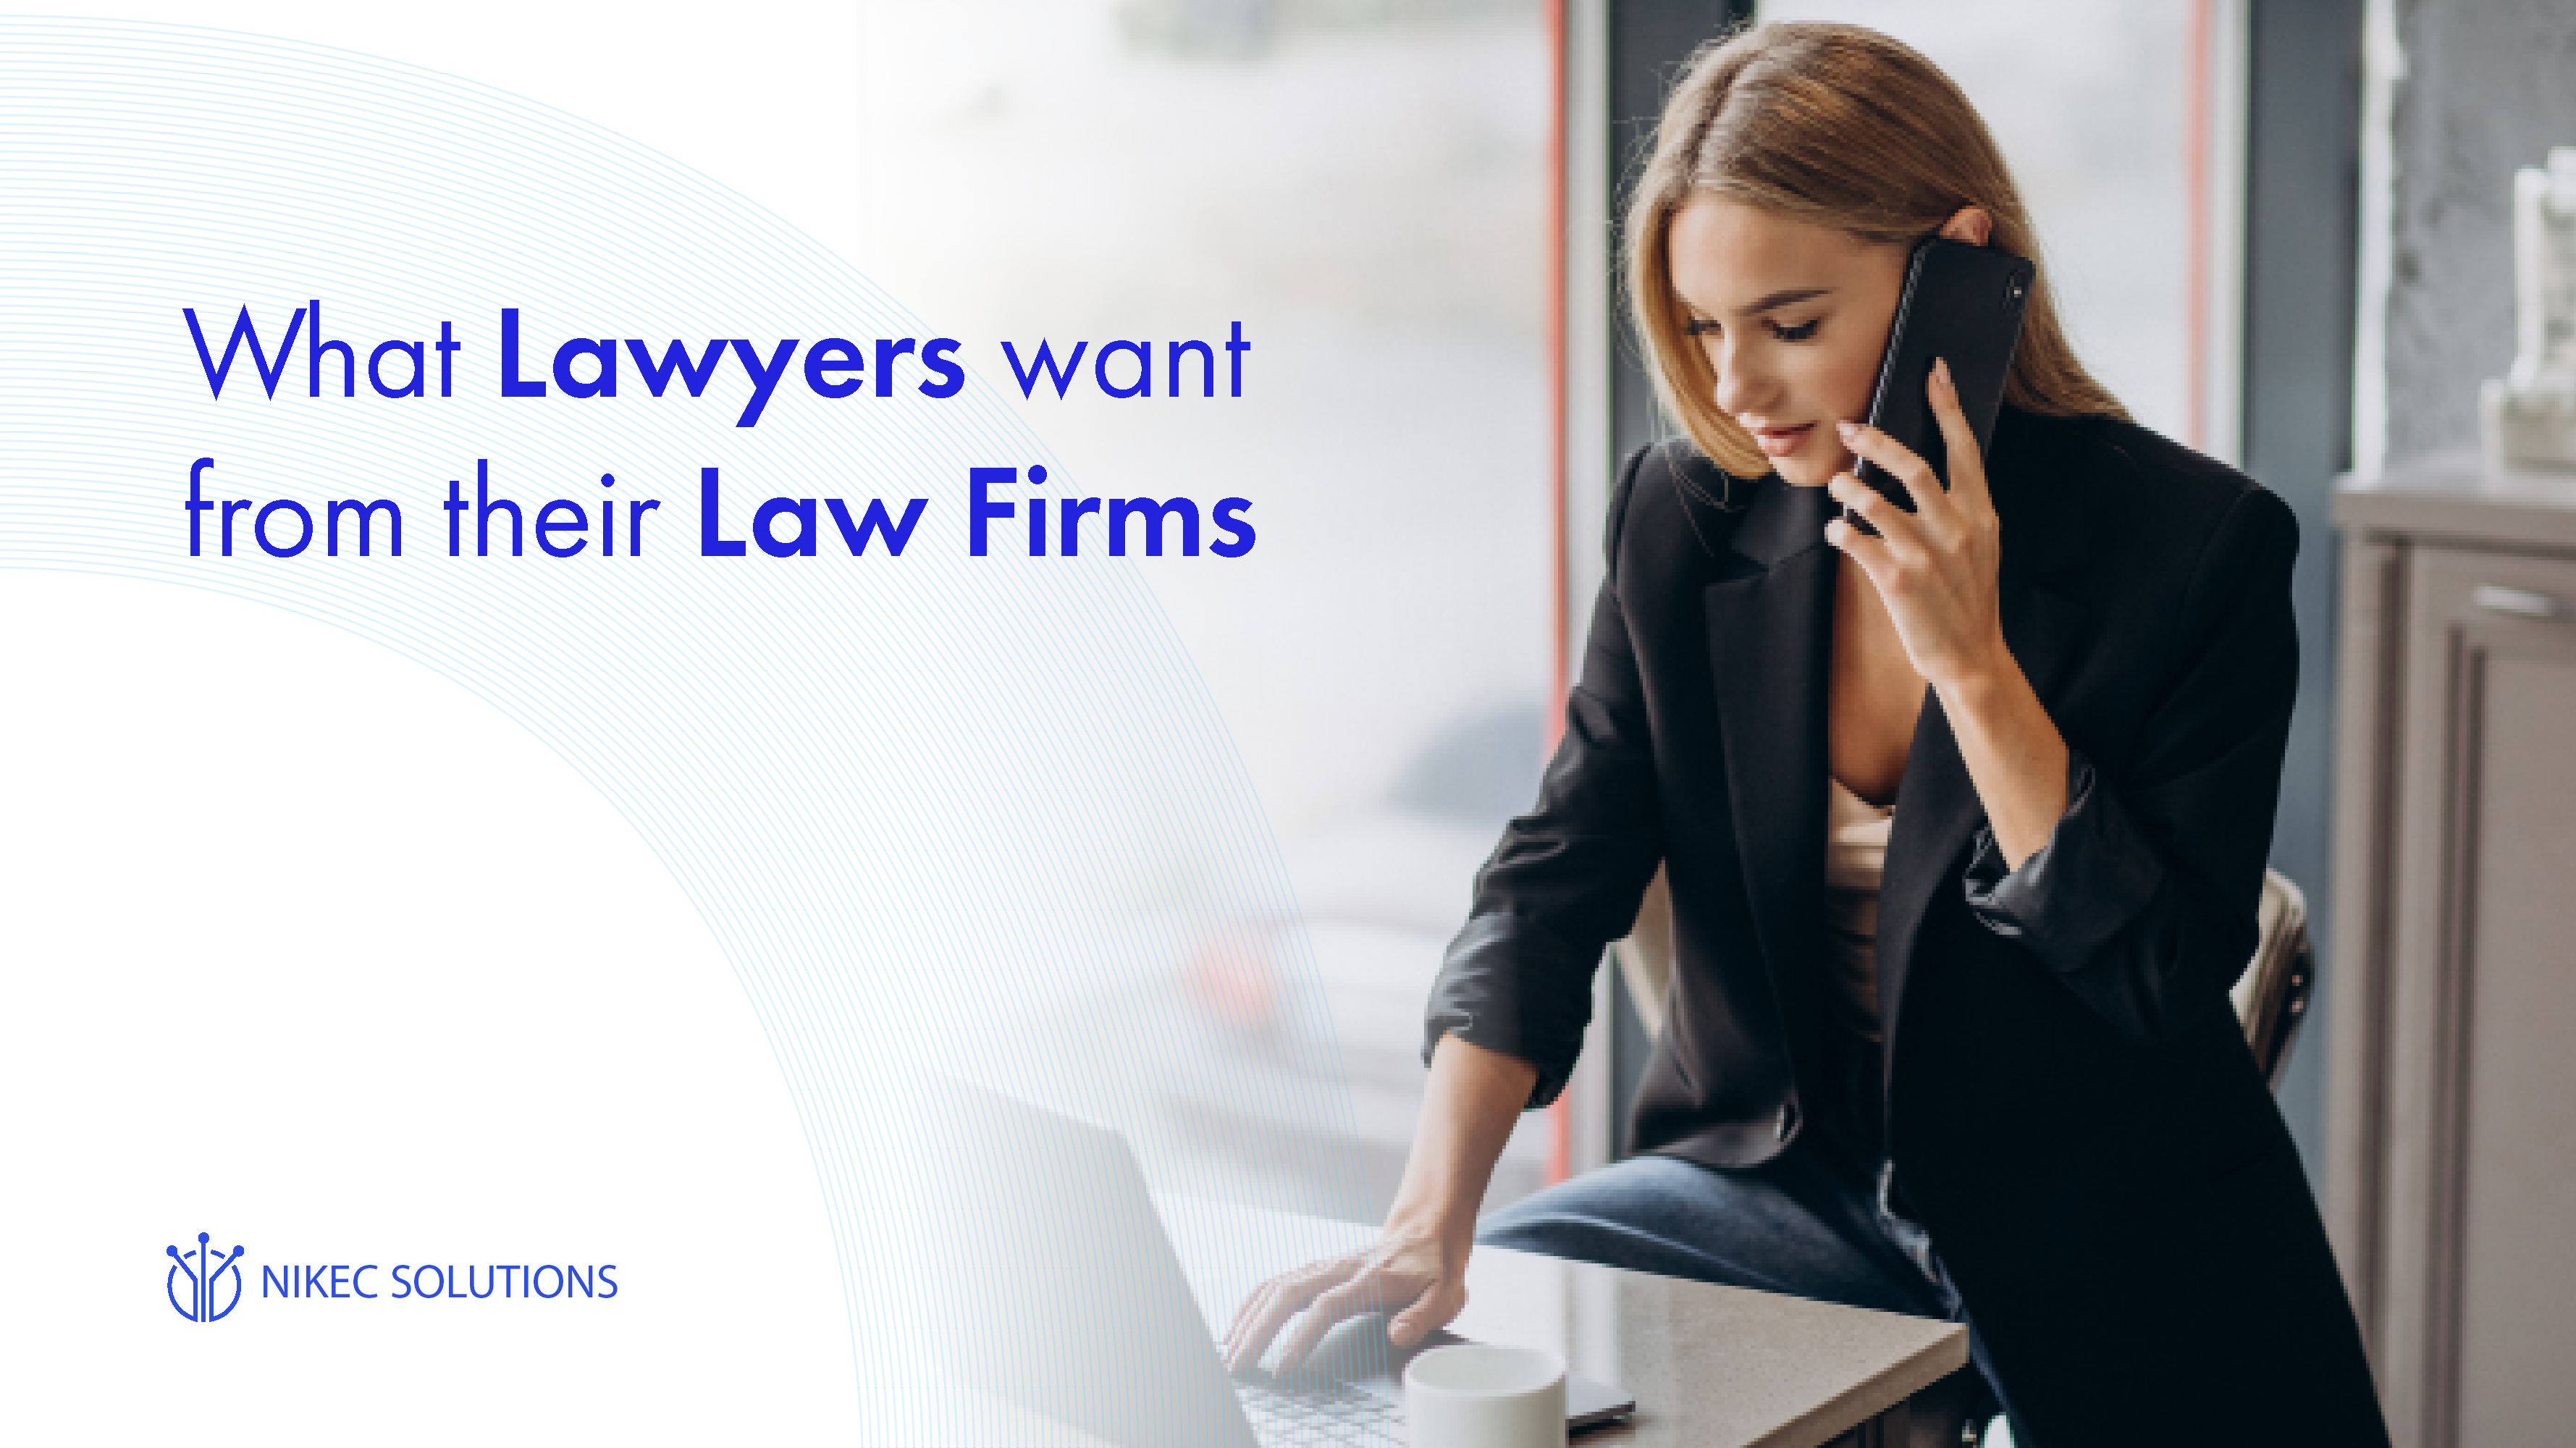 What Lawyers want from their Law Firms